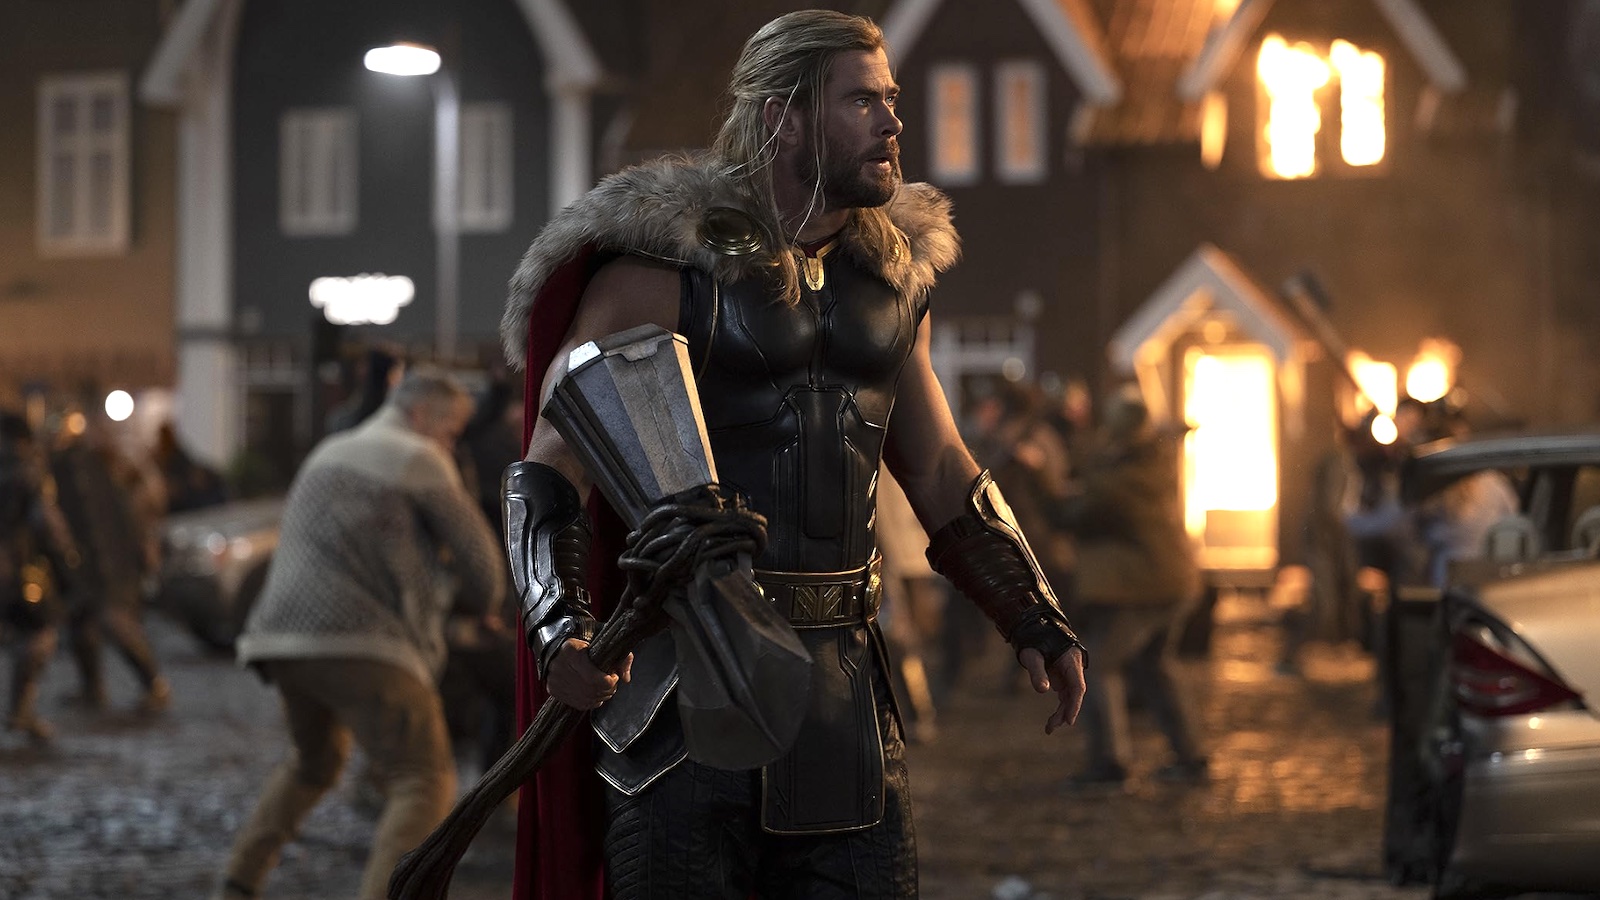 Netflix Life - Thor: Ragnarok is coming to Netflix in four